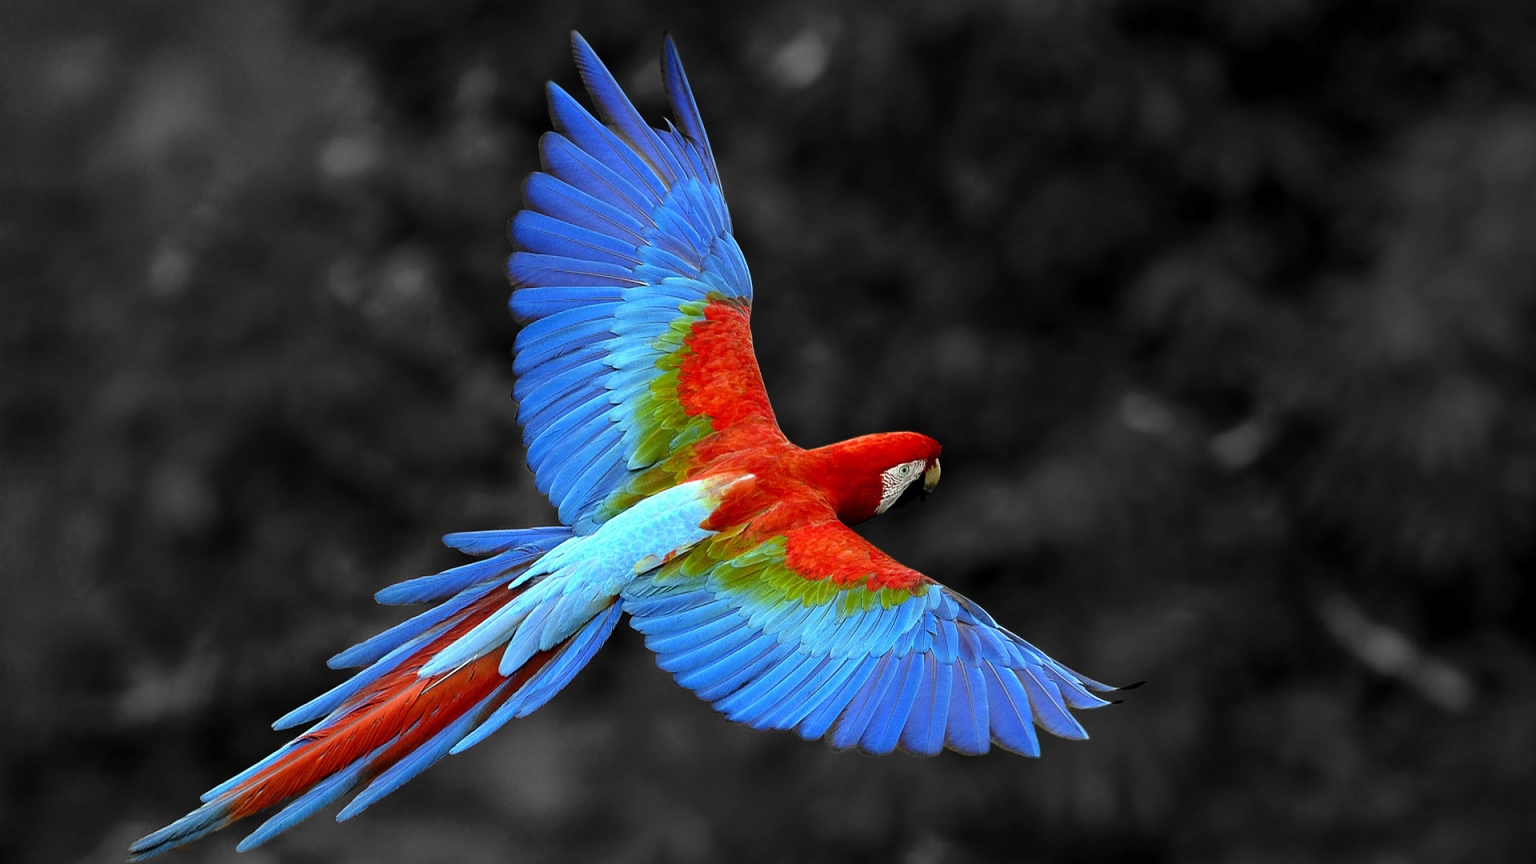 Great Colorful Parrot for 1536 x 864 HDTV resolution